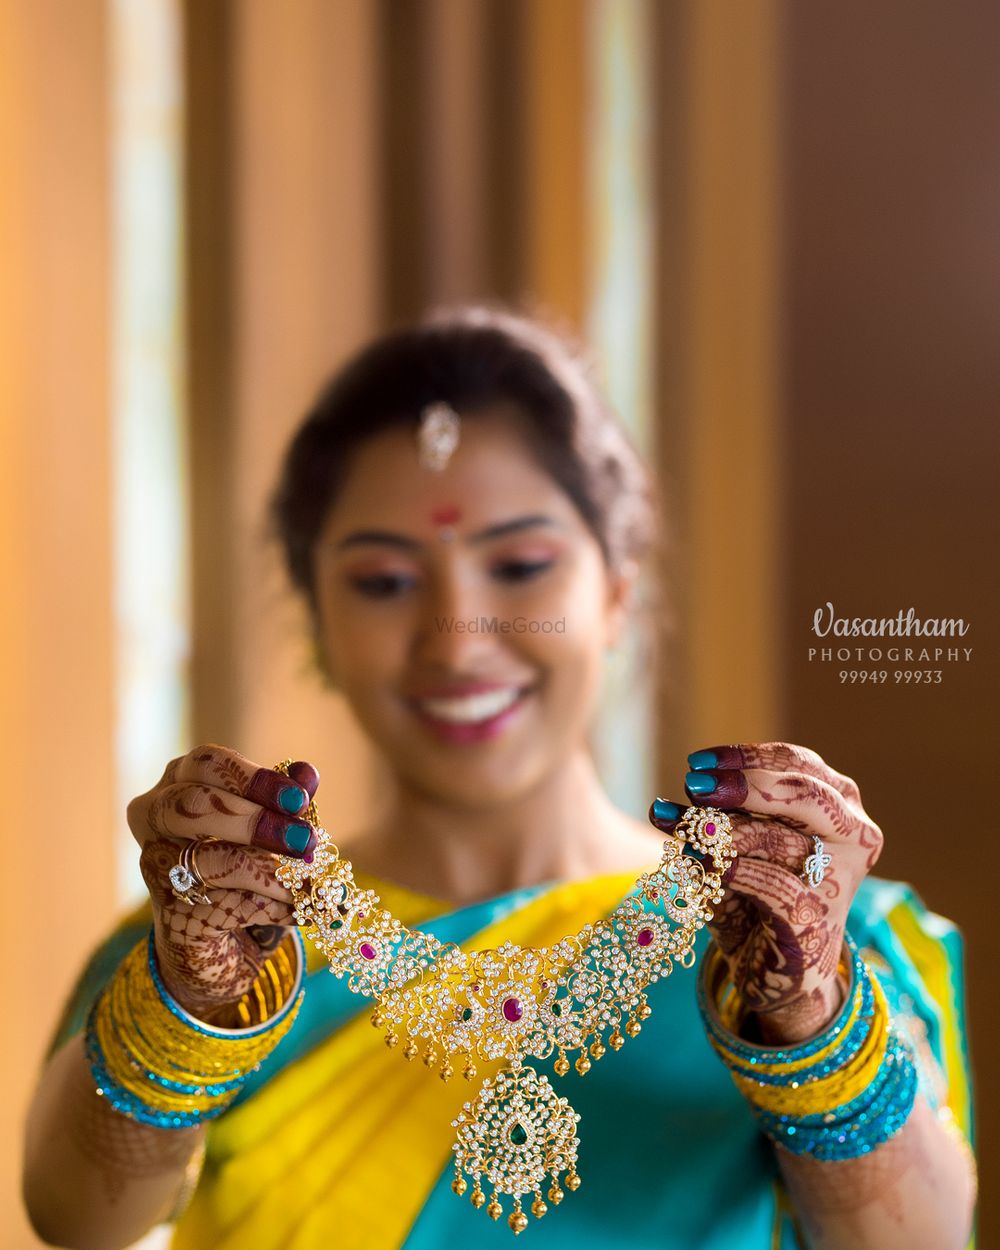 Photo From Engagement Ceremony - By Vasantham Photography